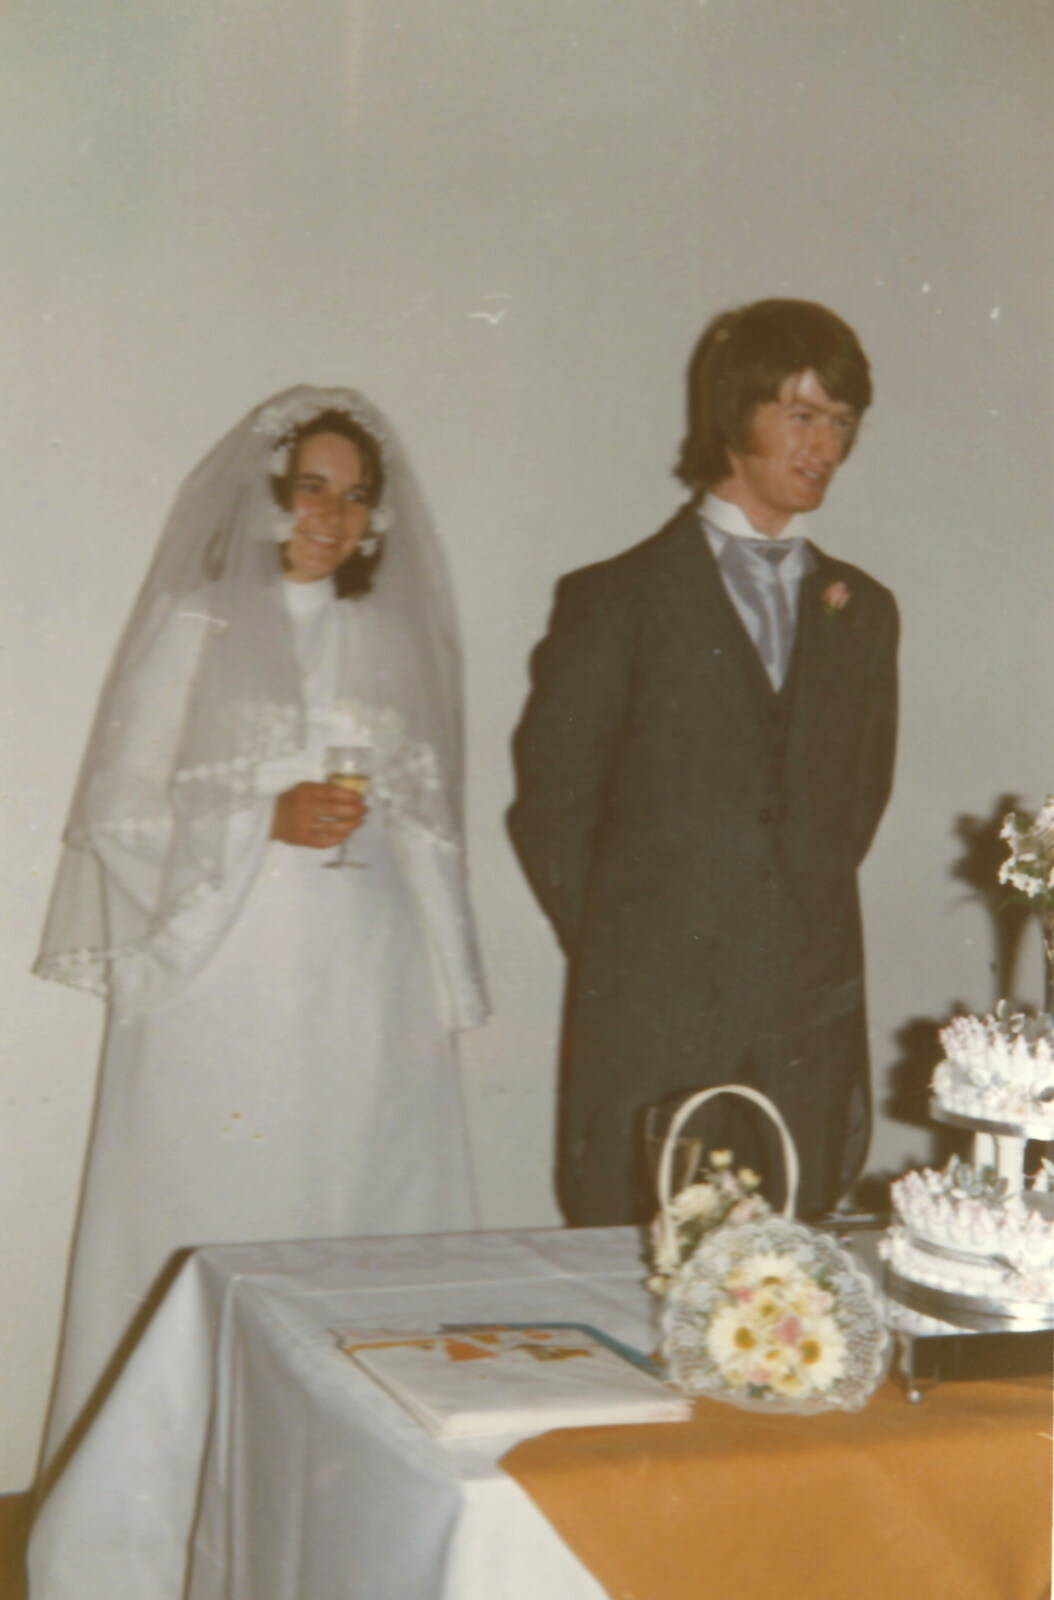 Caroline and Neil from Family History: The 1970s, Timperley and Sandbach, Cheshire - 24th January 2020